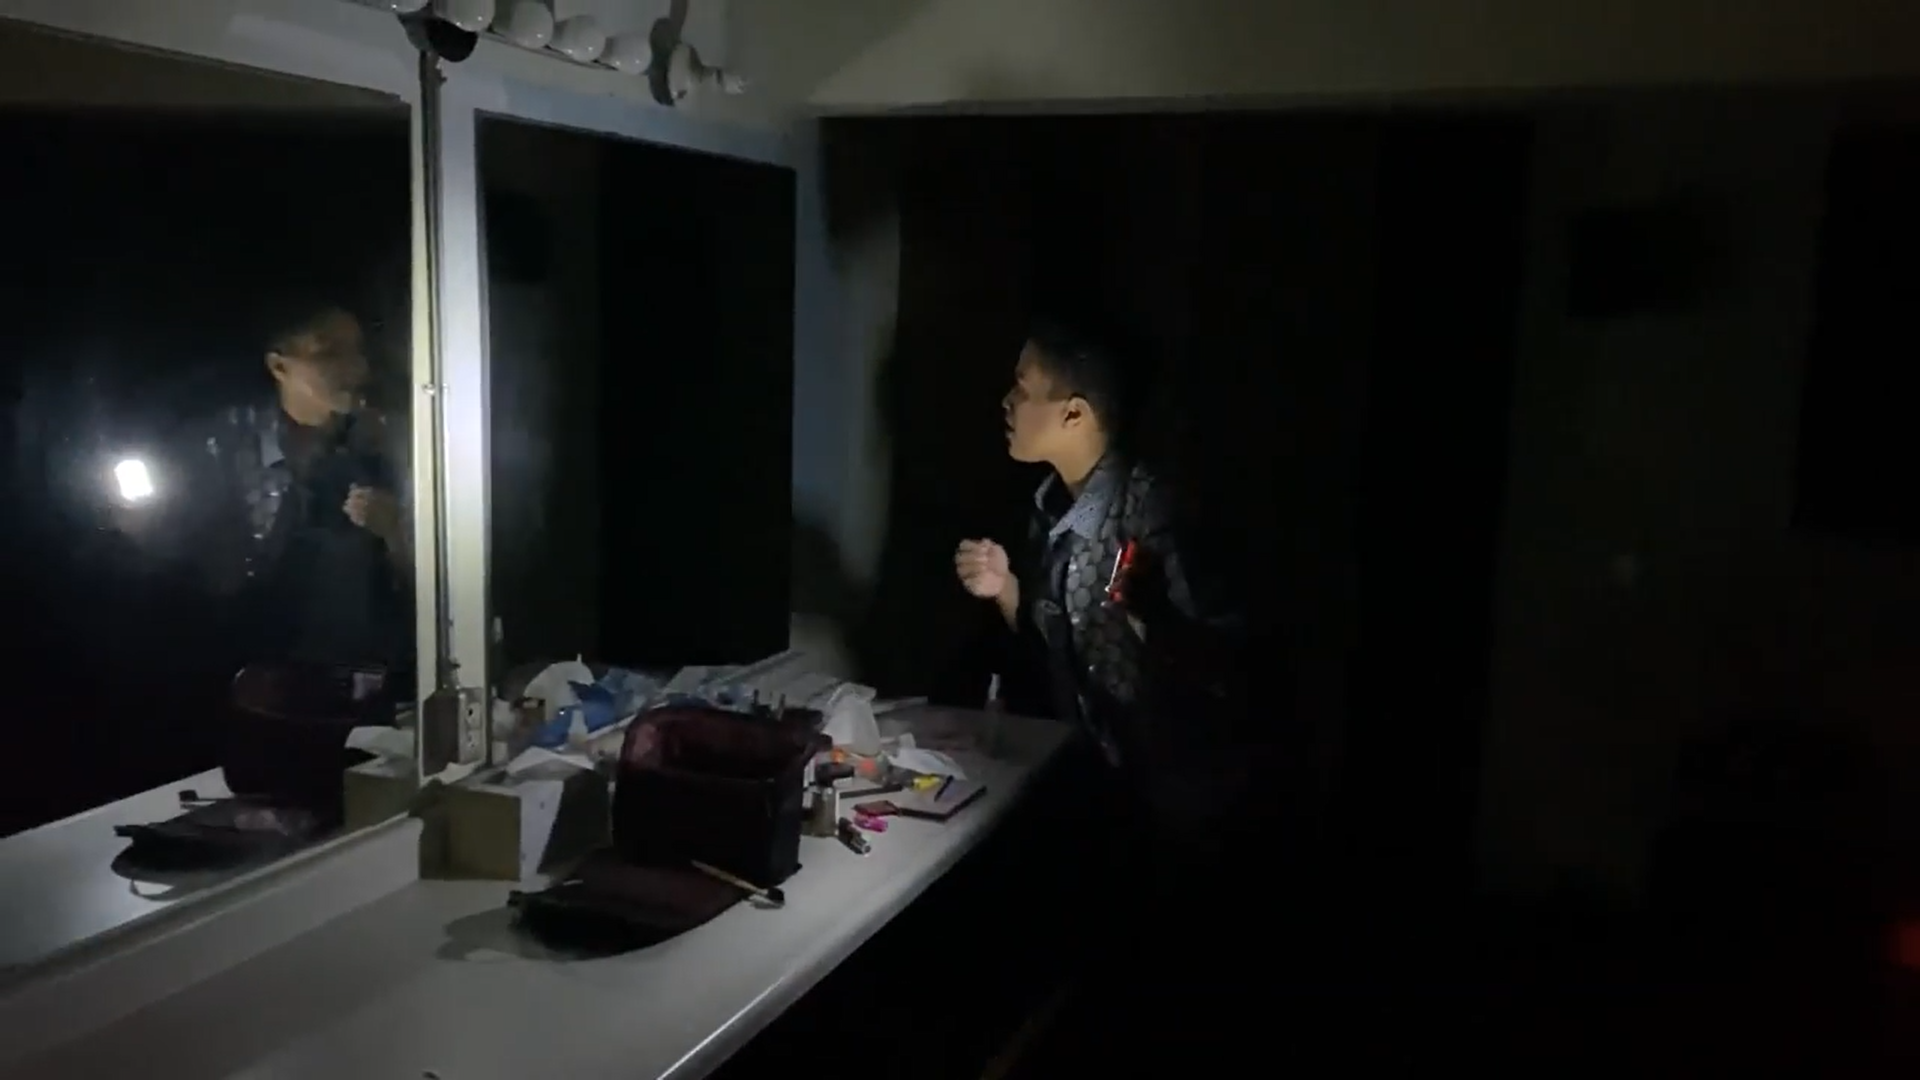 Mx examines themselves in a dark dressing room mirror holding their light.